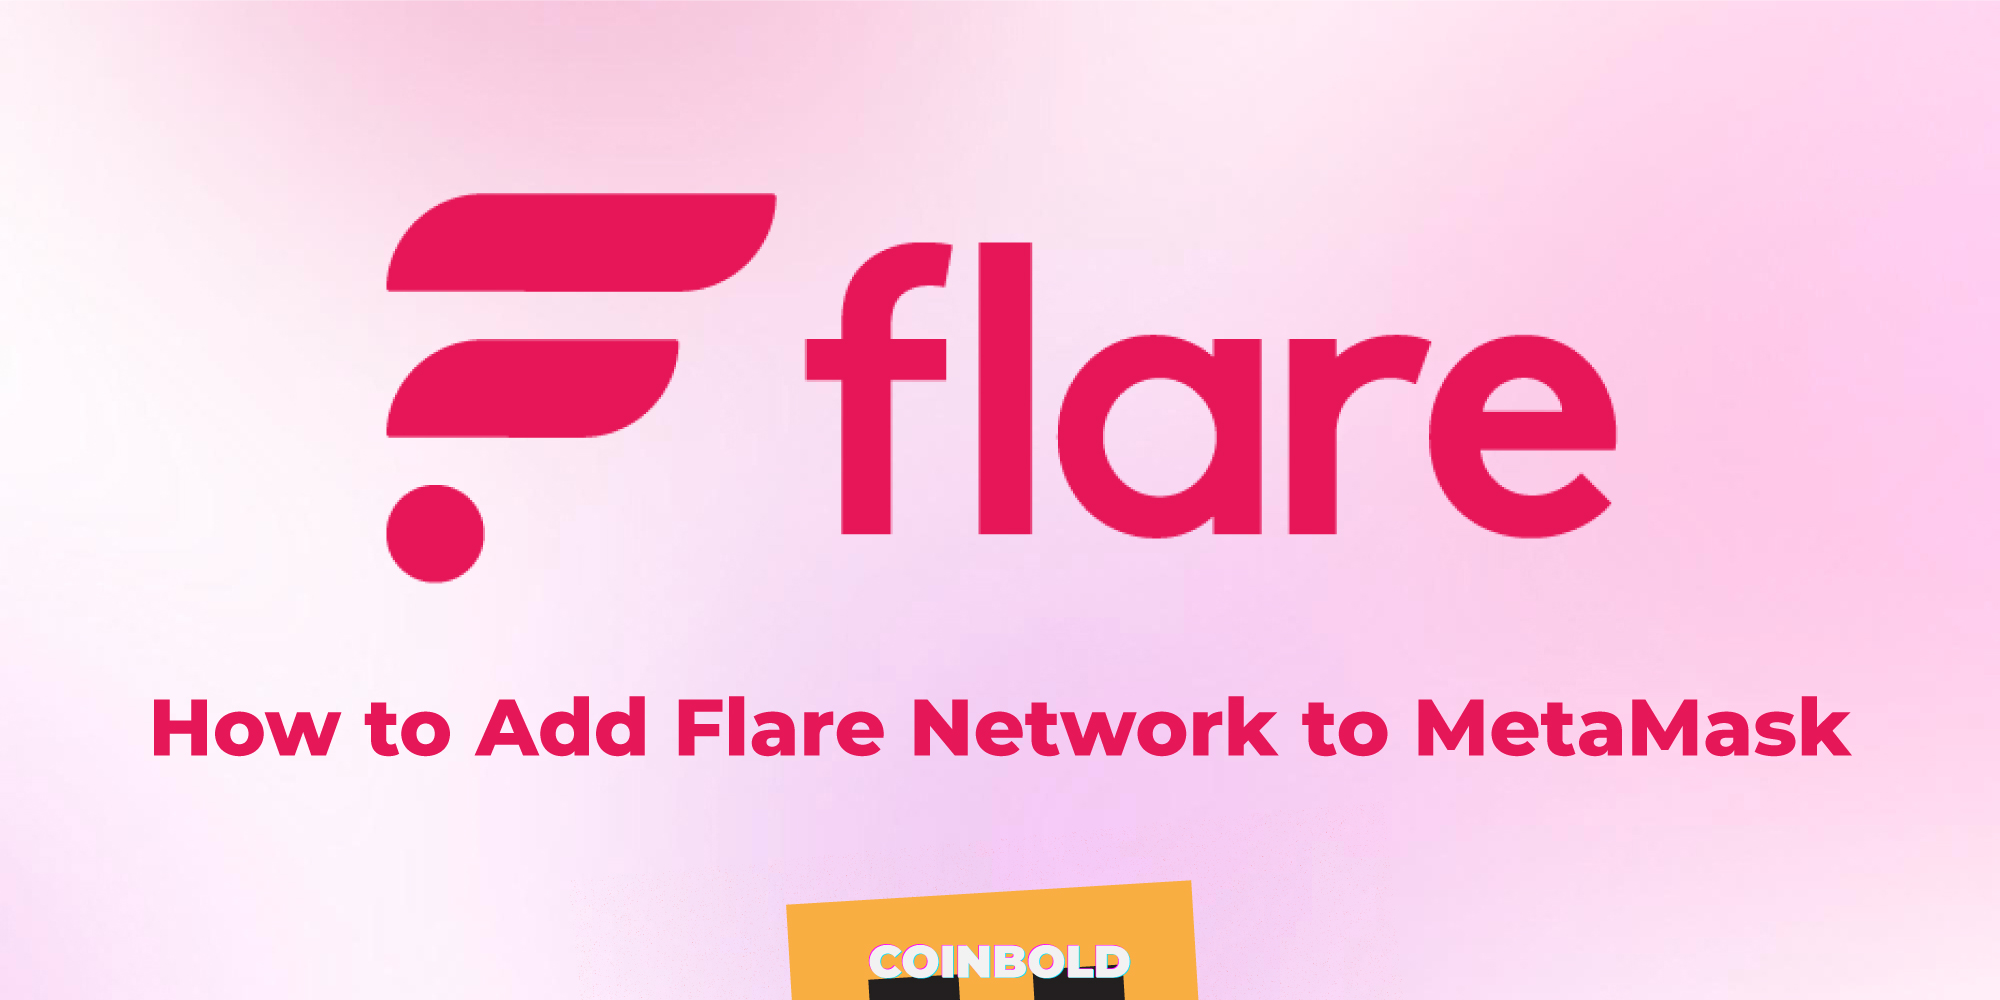 How to Add Flare Network to MetaMask